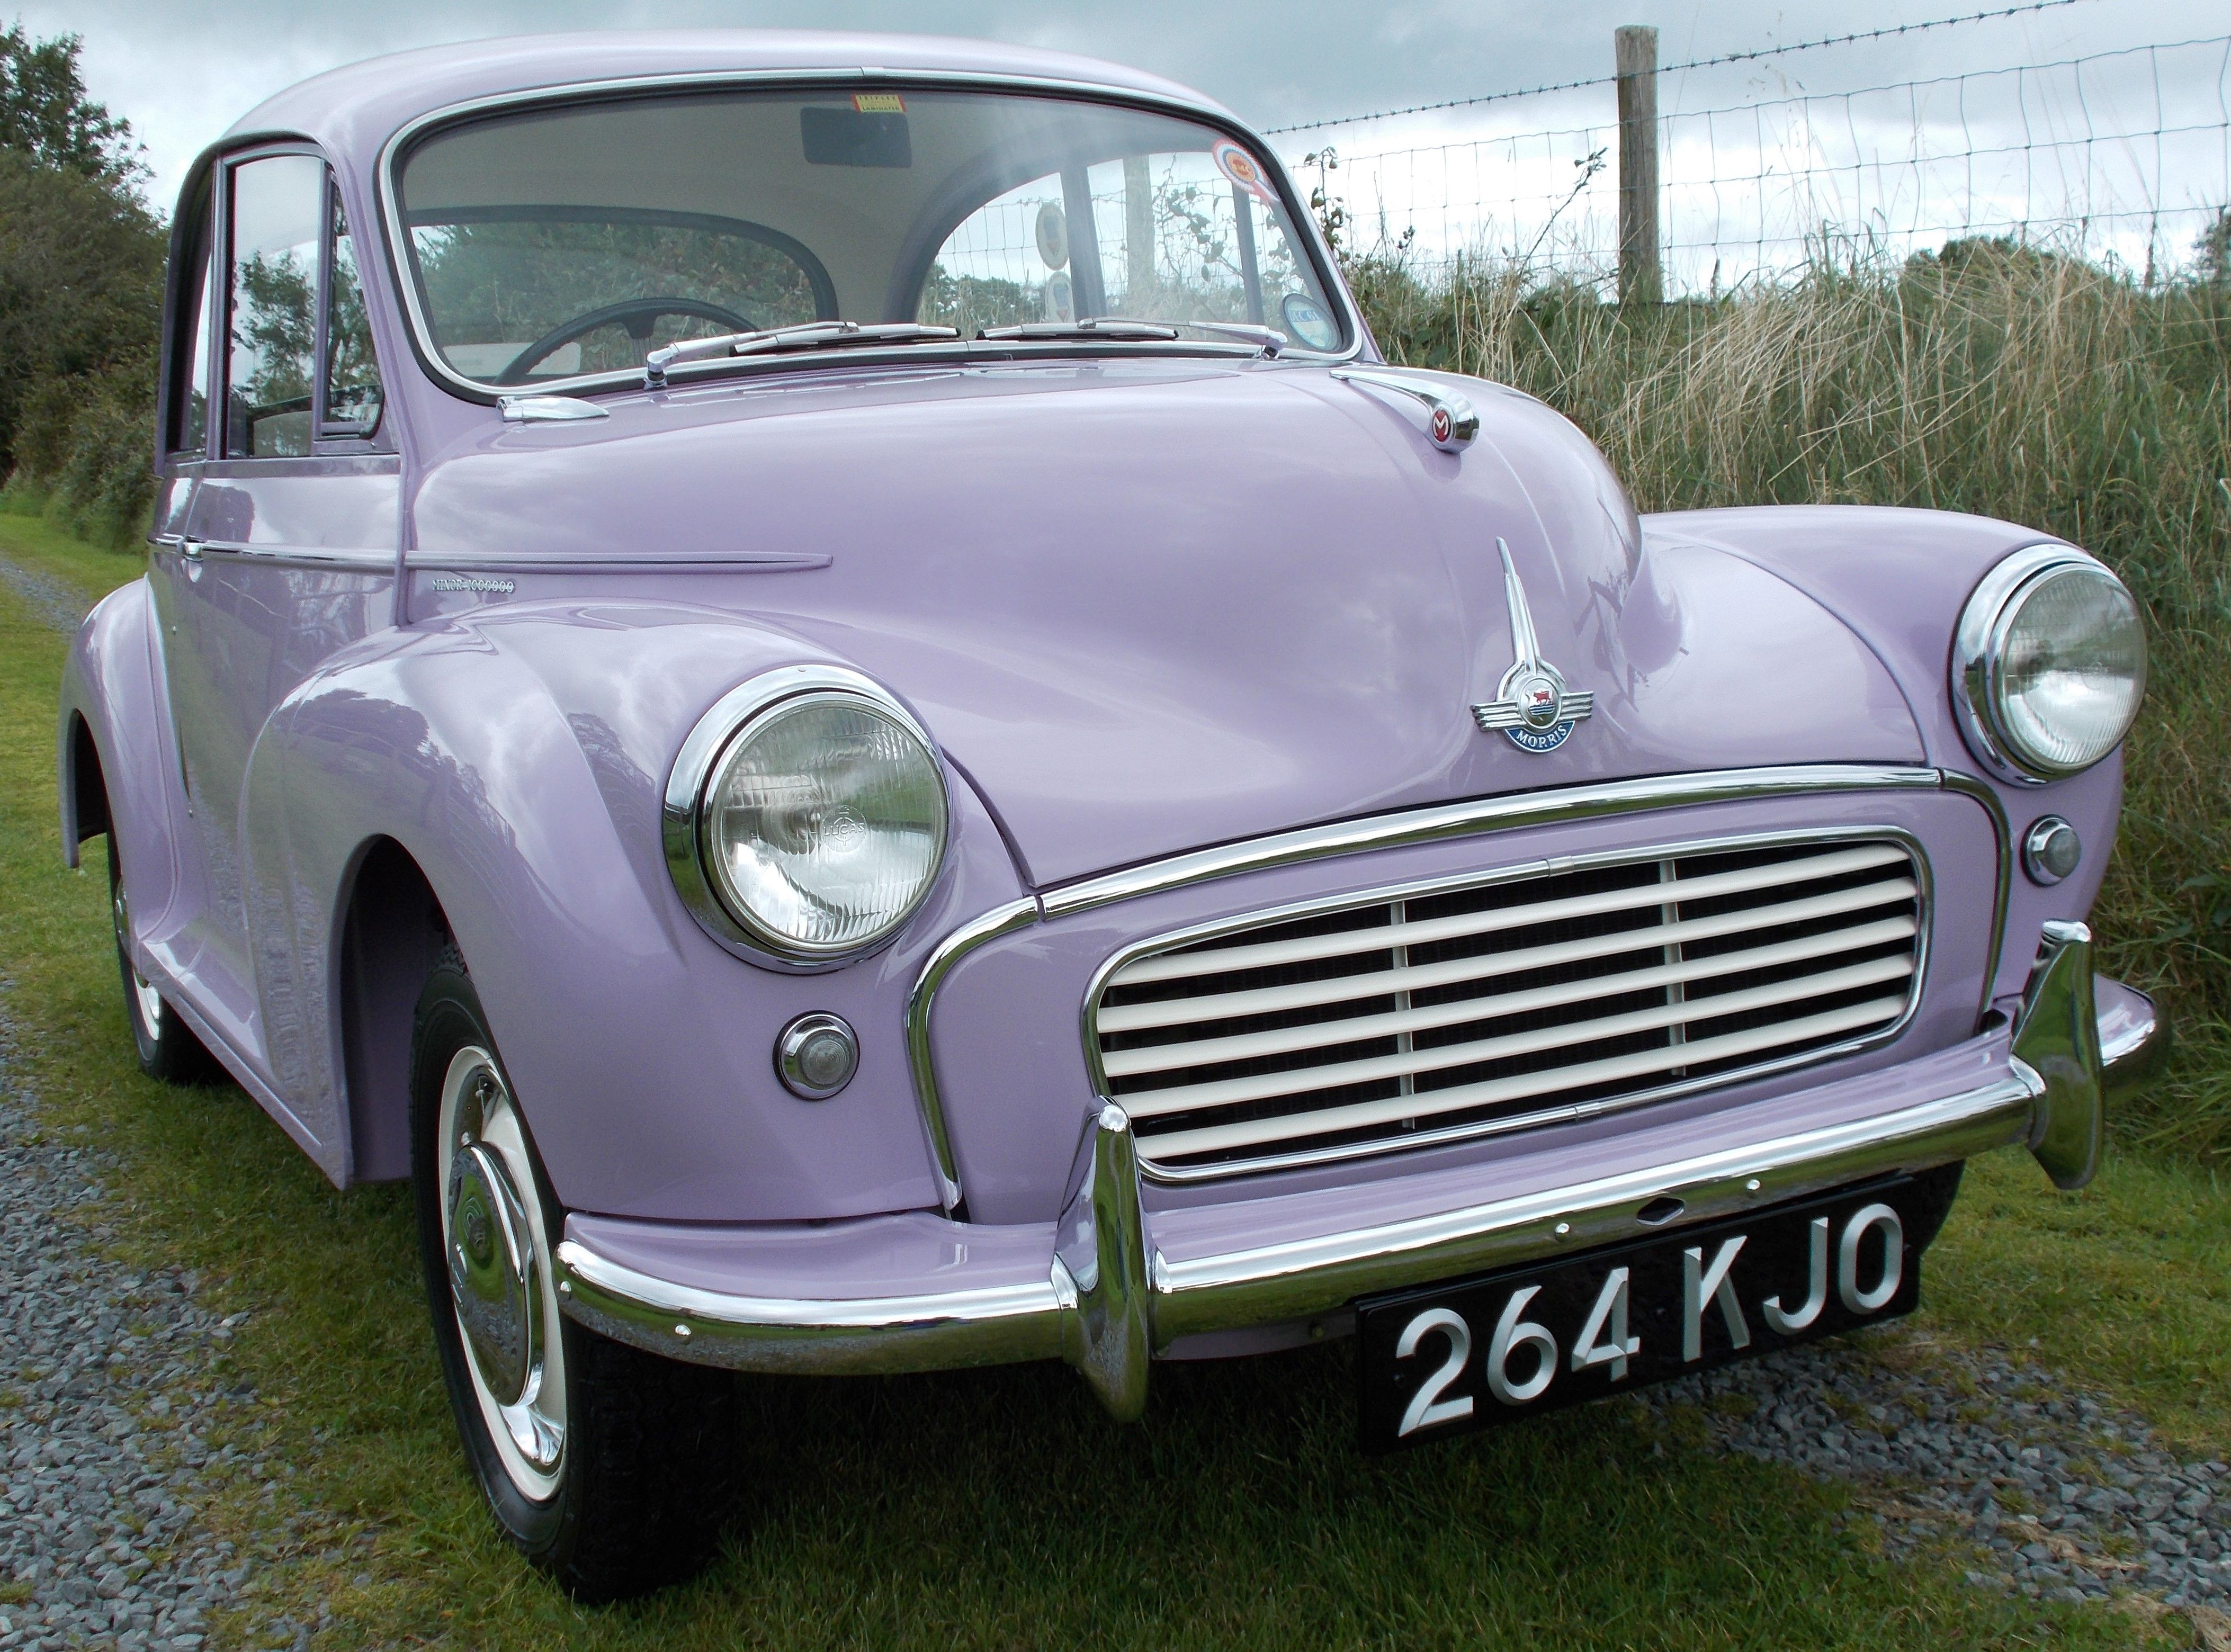 Ted Brooke’s award winning Minor Million will be amongst the display of Minor Millions on the Morris Minor Owners Club stand